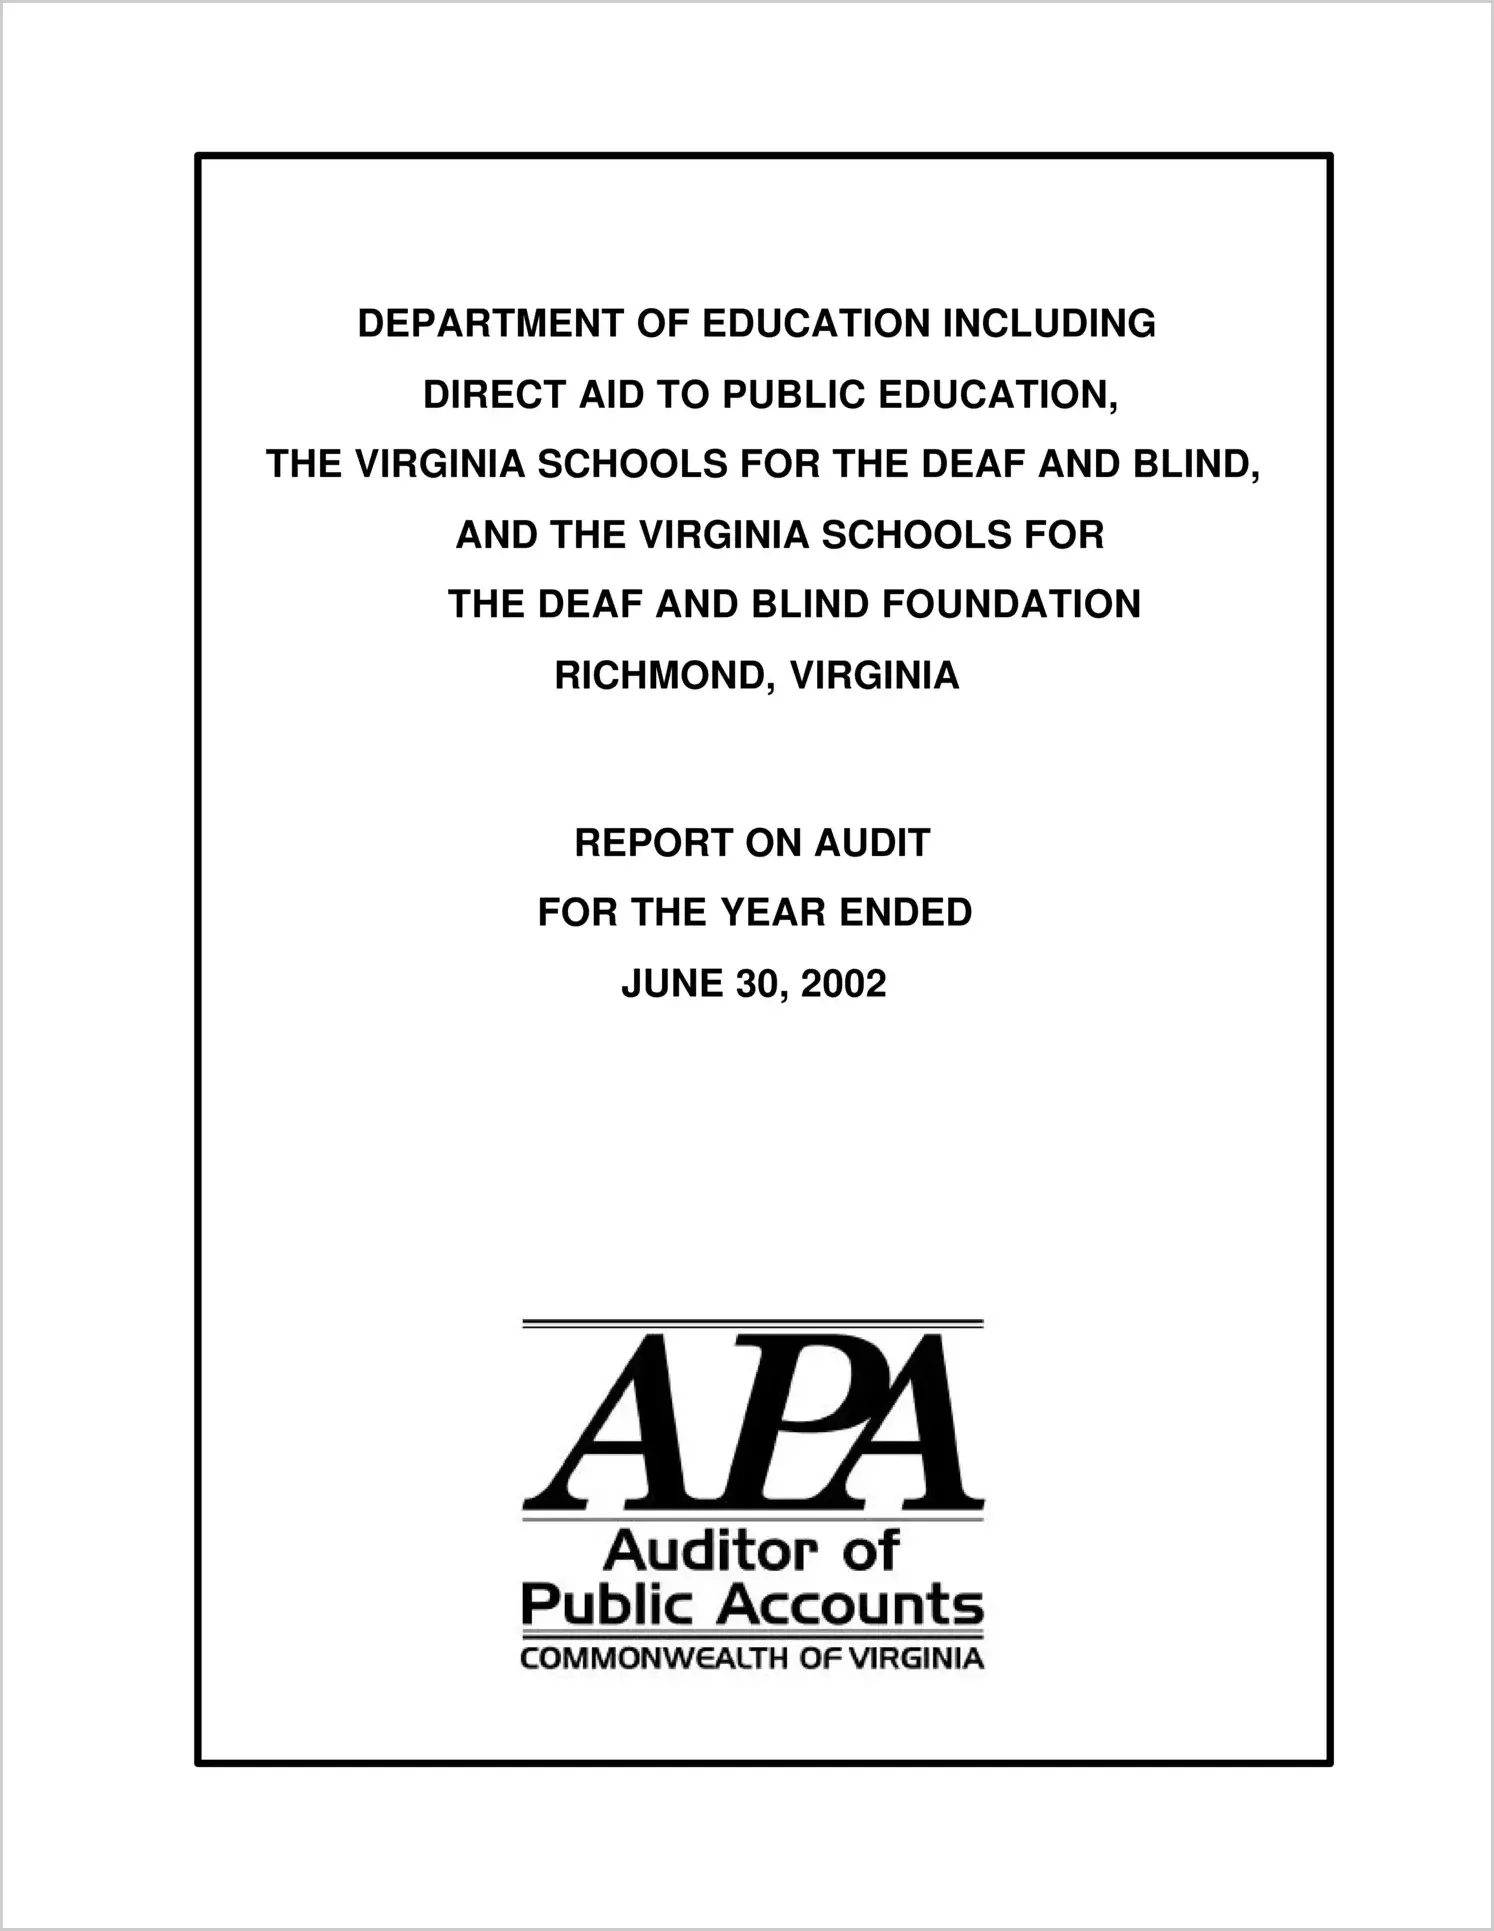 Department of Education Including Direct Aid to Public Education, the Virginia Schools for the Deaf and Blind, and the Virginia Schools for the Deaf and Blind Foundation for the year ended June 30, 2002